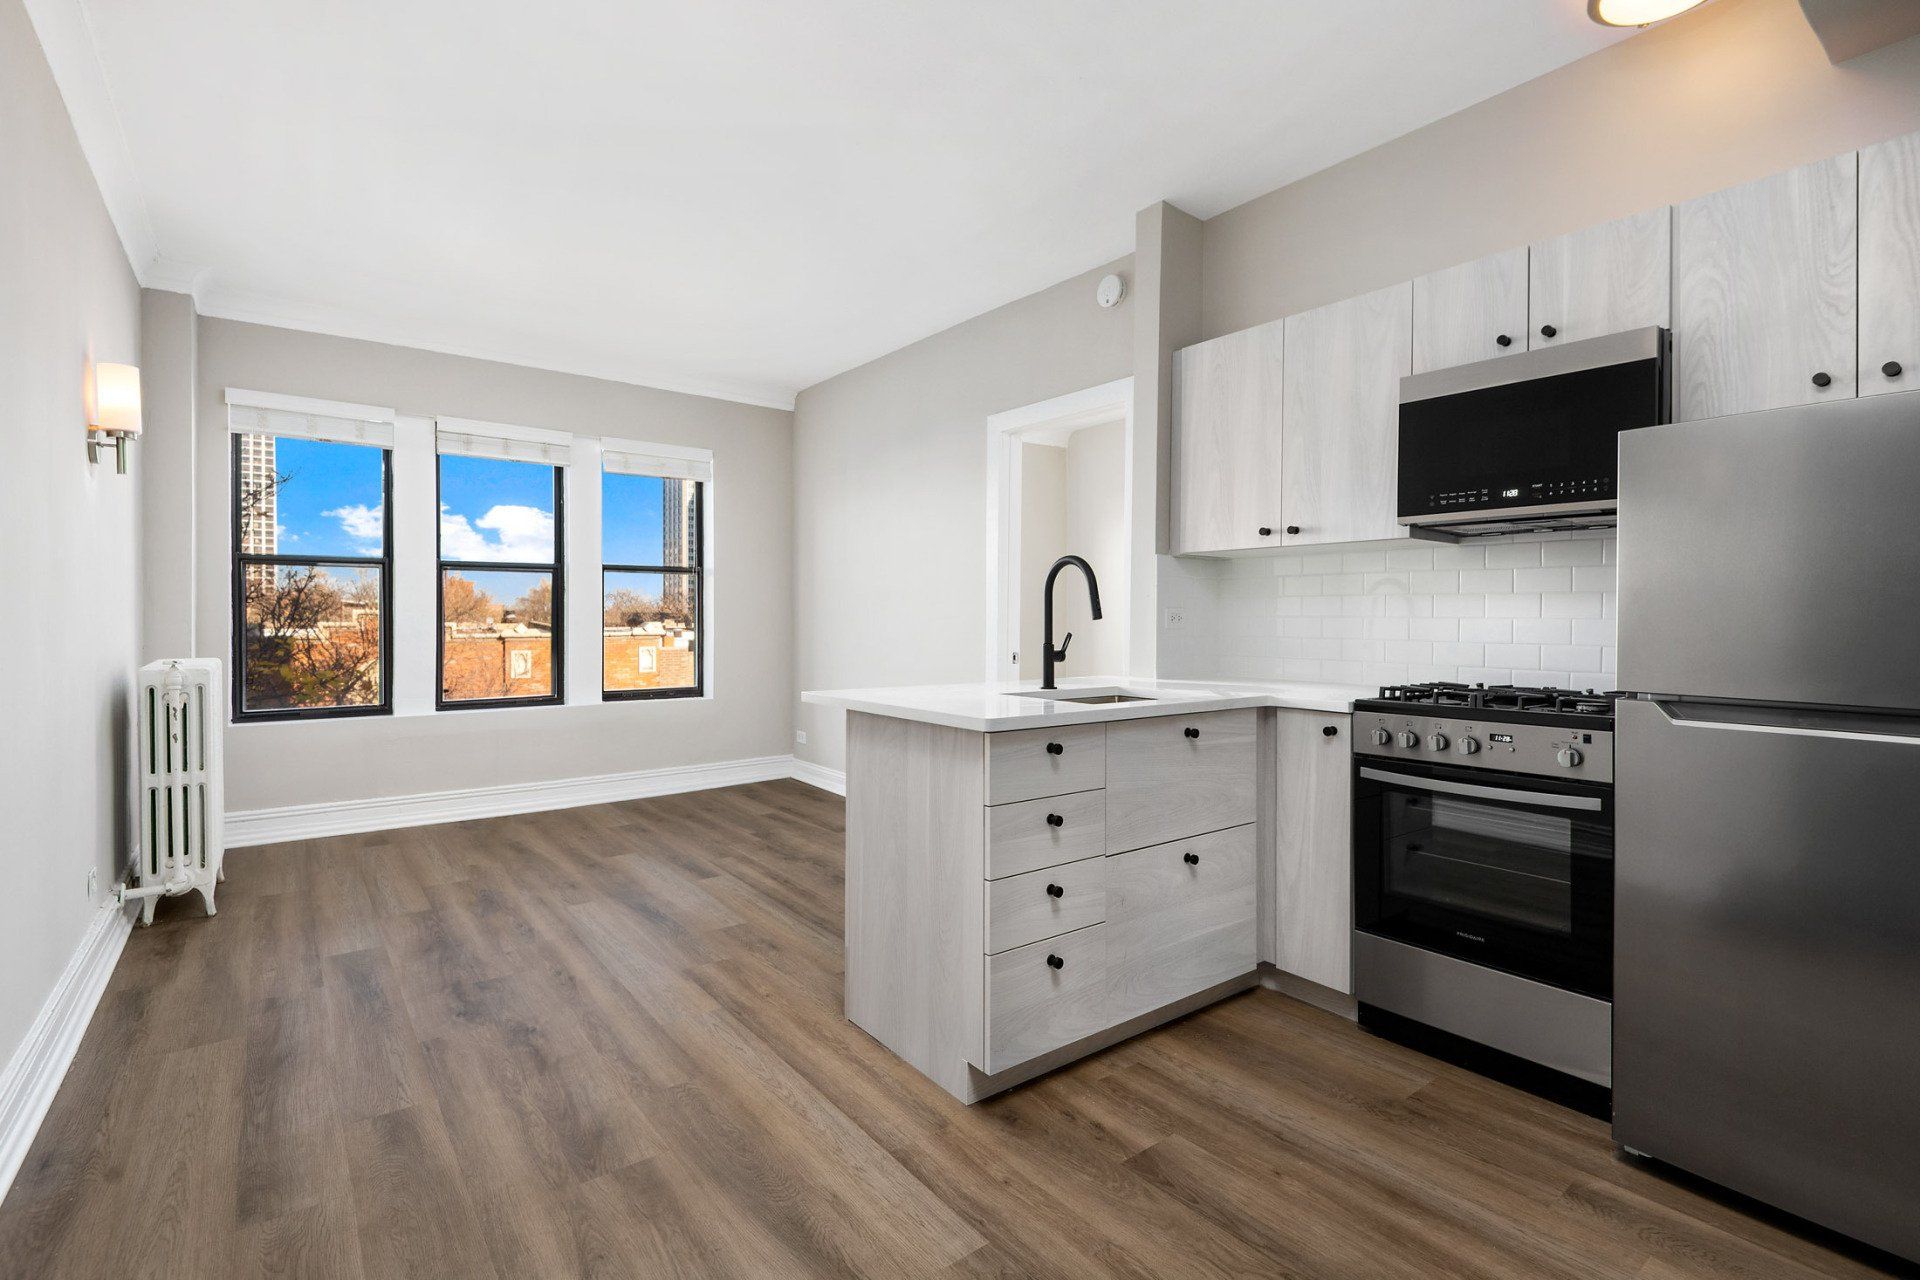 A kitchen with stainless steel appliances and a large window at Reside on Clarendon.